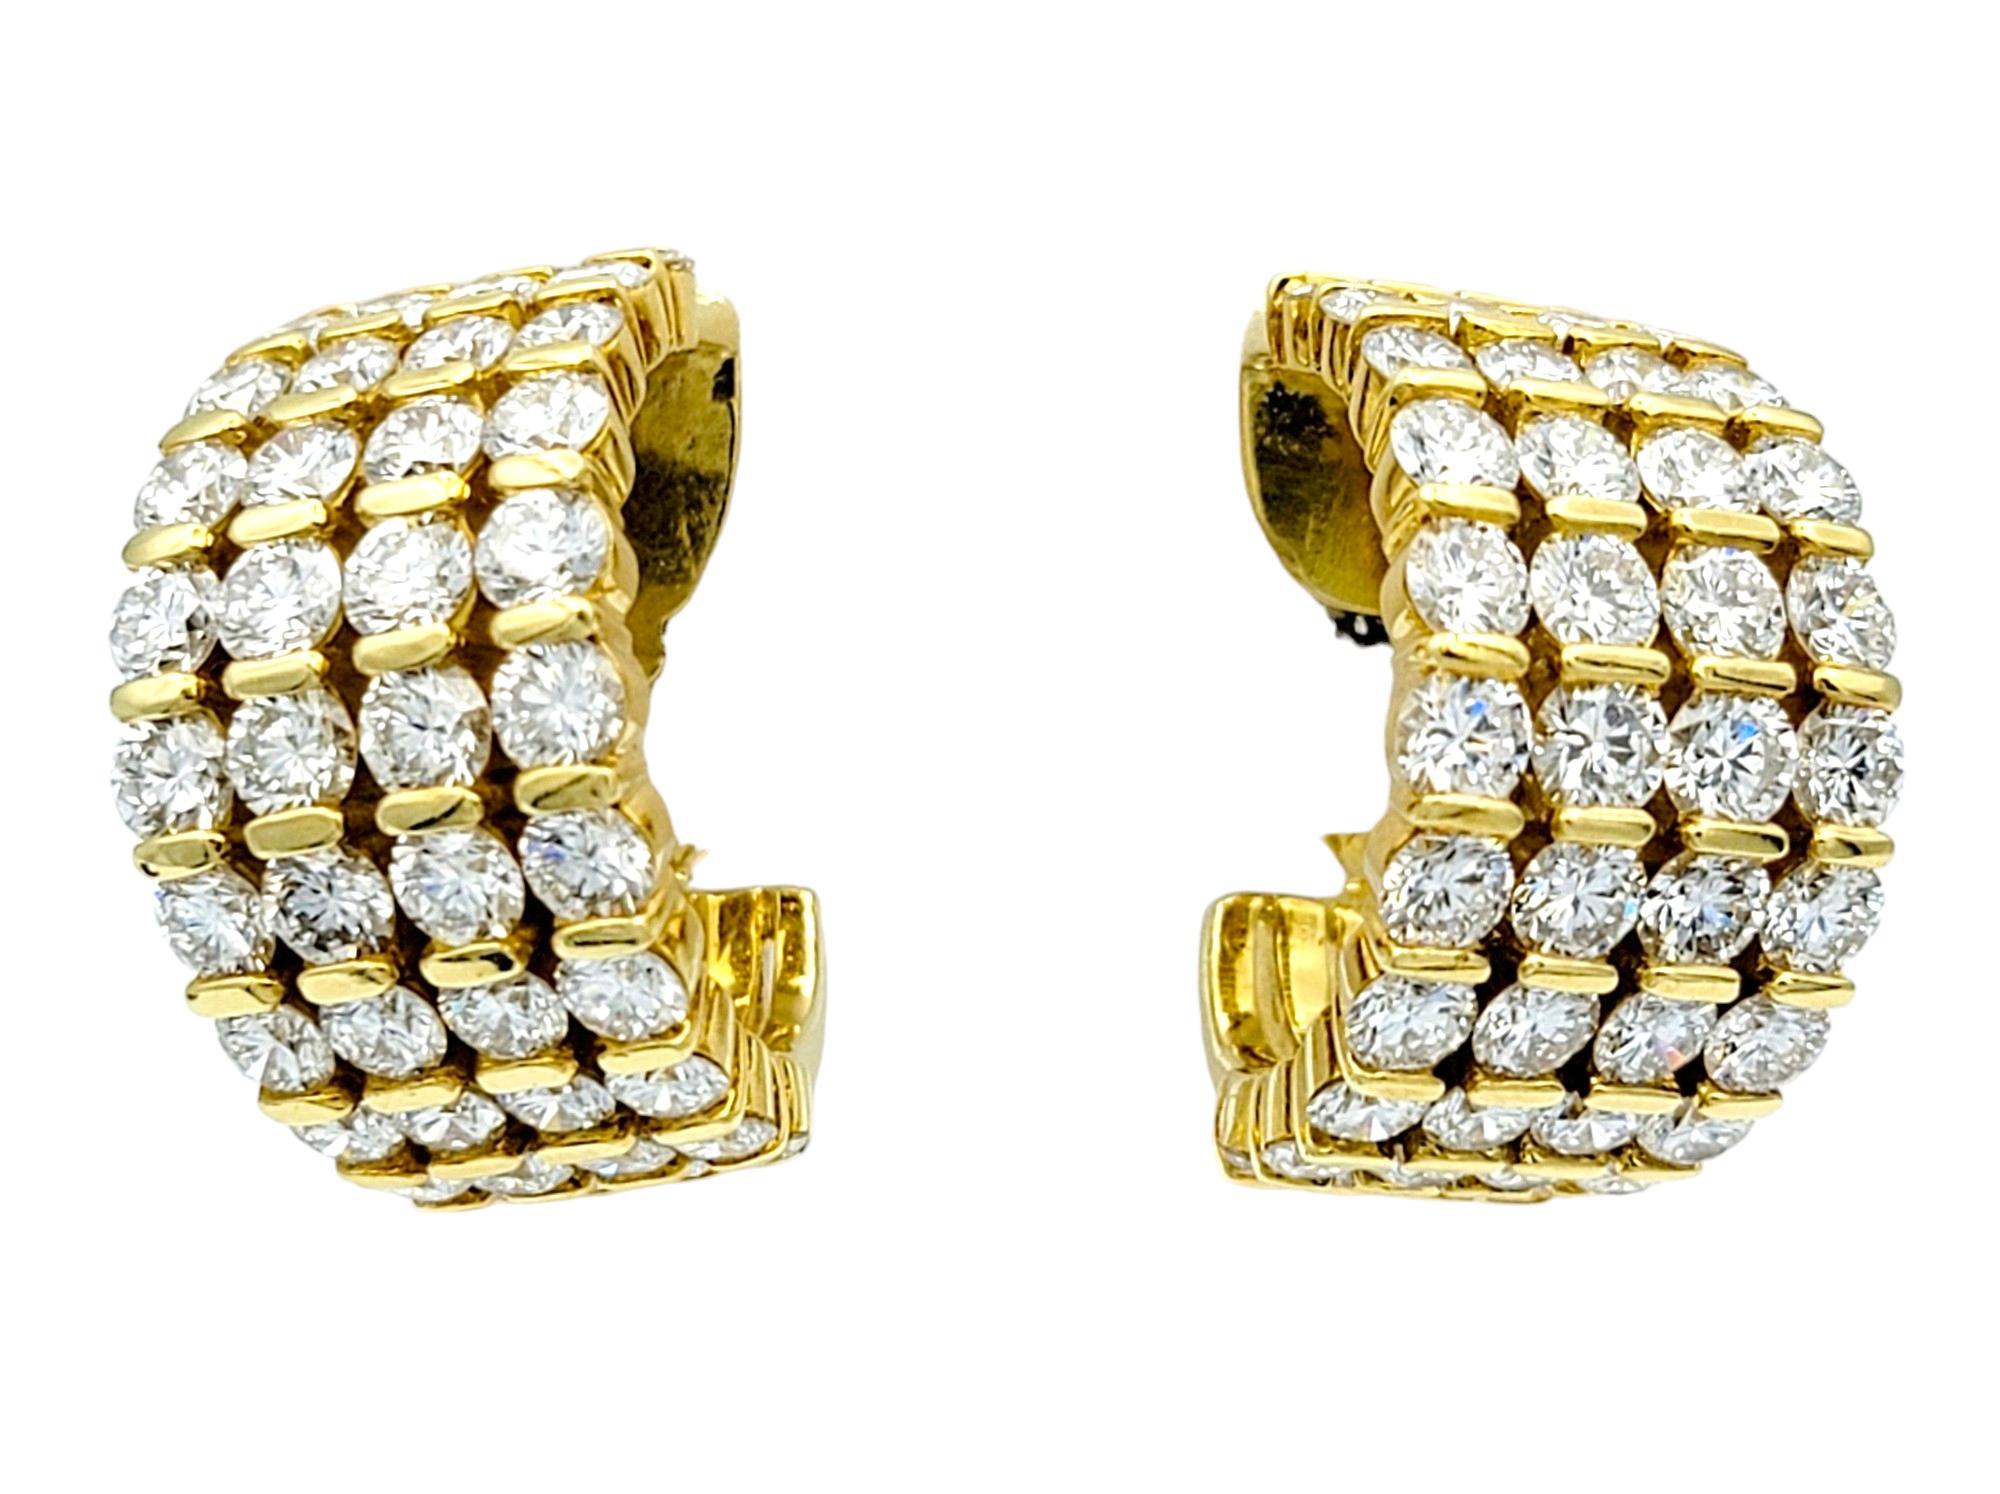 These exquisite diamond hoop earrings, set in lustrous 18 karat yellow gold, are a dazzling testament to elegance and sophistication. Each earring features four vertical rows of round diamonds, meticulously arranged to create a wide and sparkling